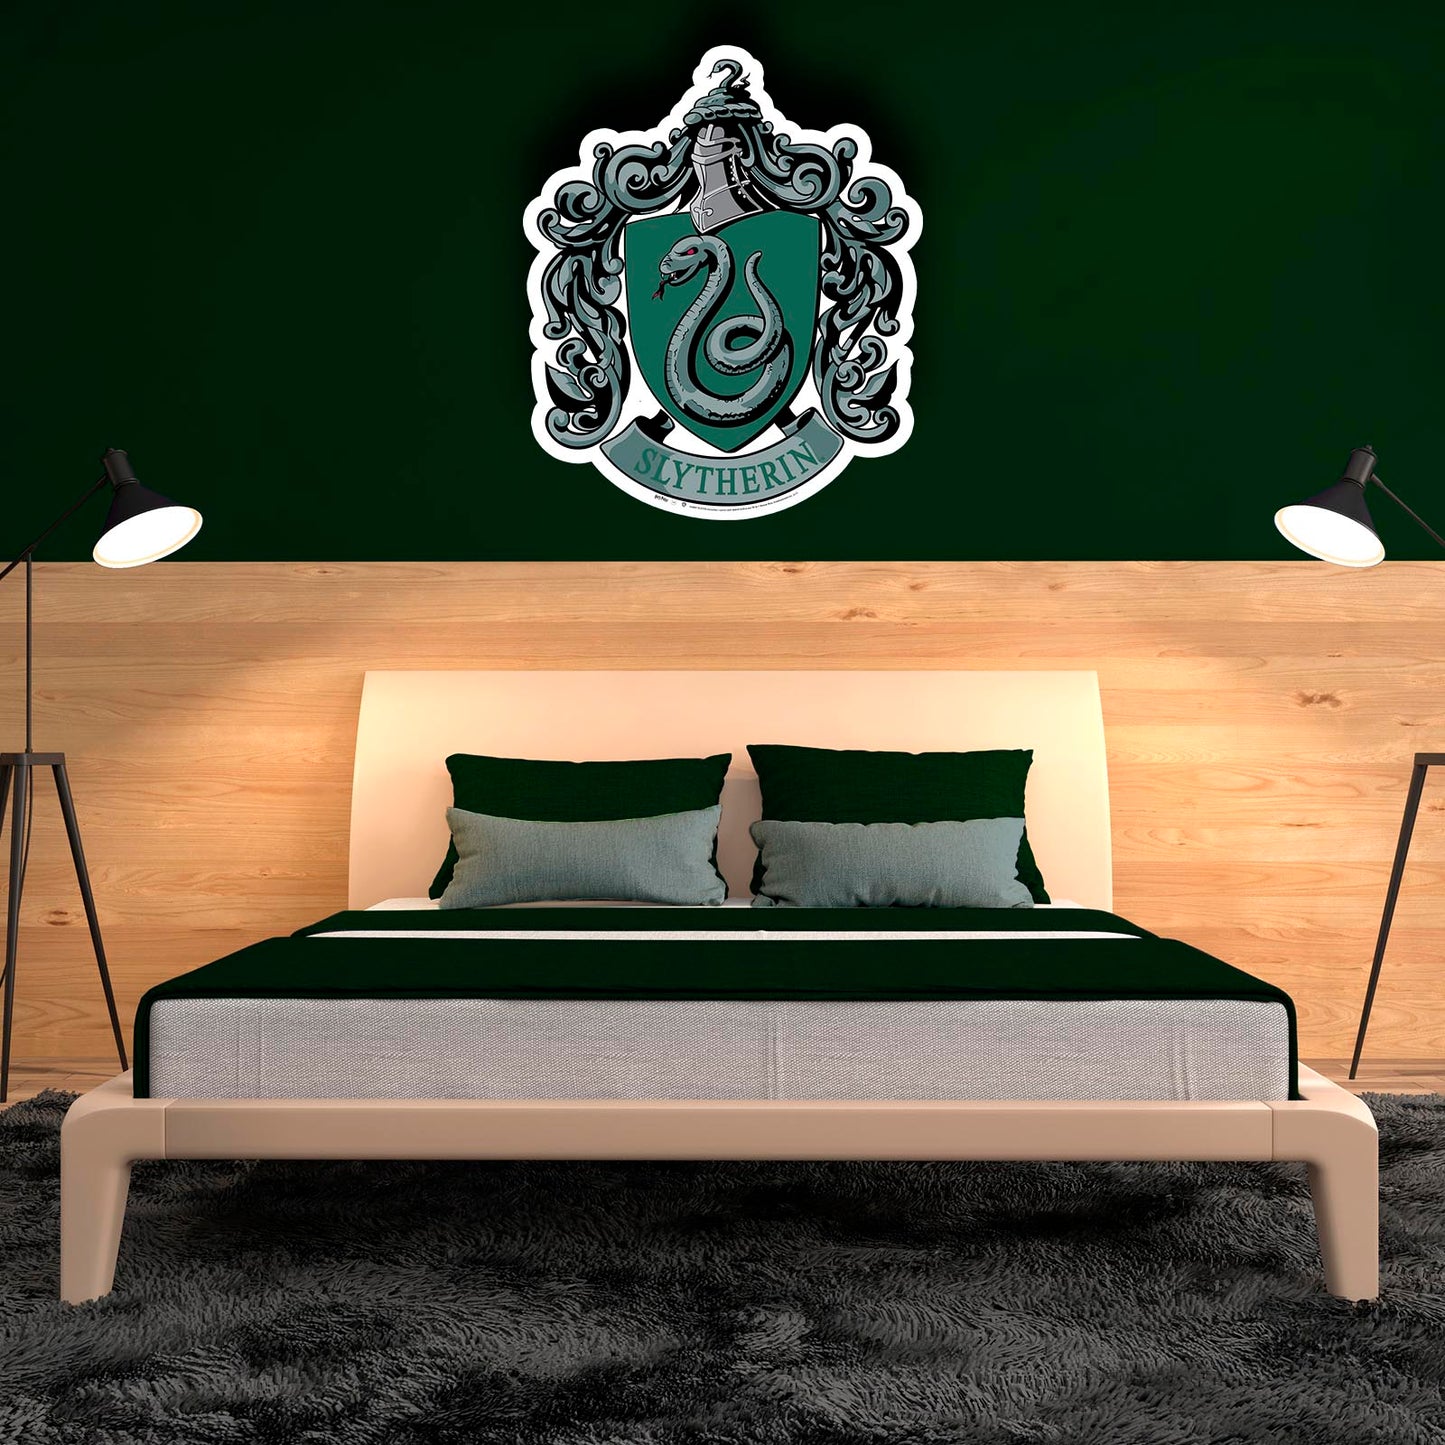 WA044 Slytherin Emblem Wall Cut Out HARRY POTTER WIZARDING WORLD Height 61cm